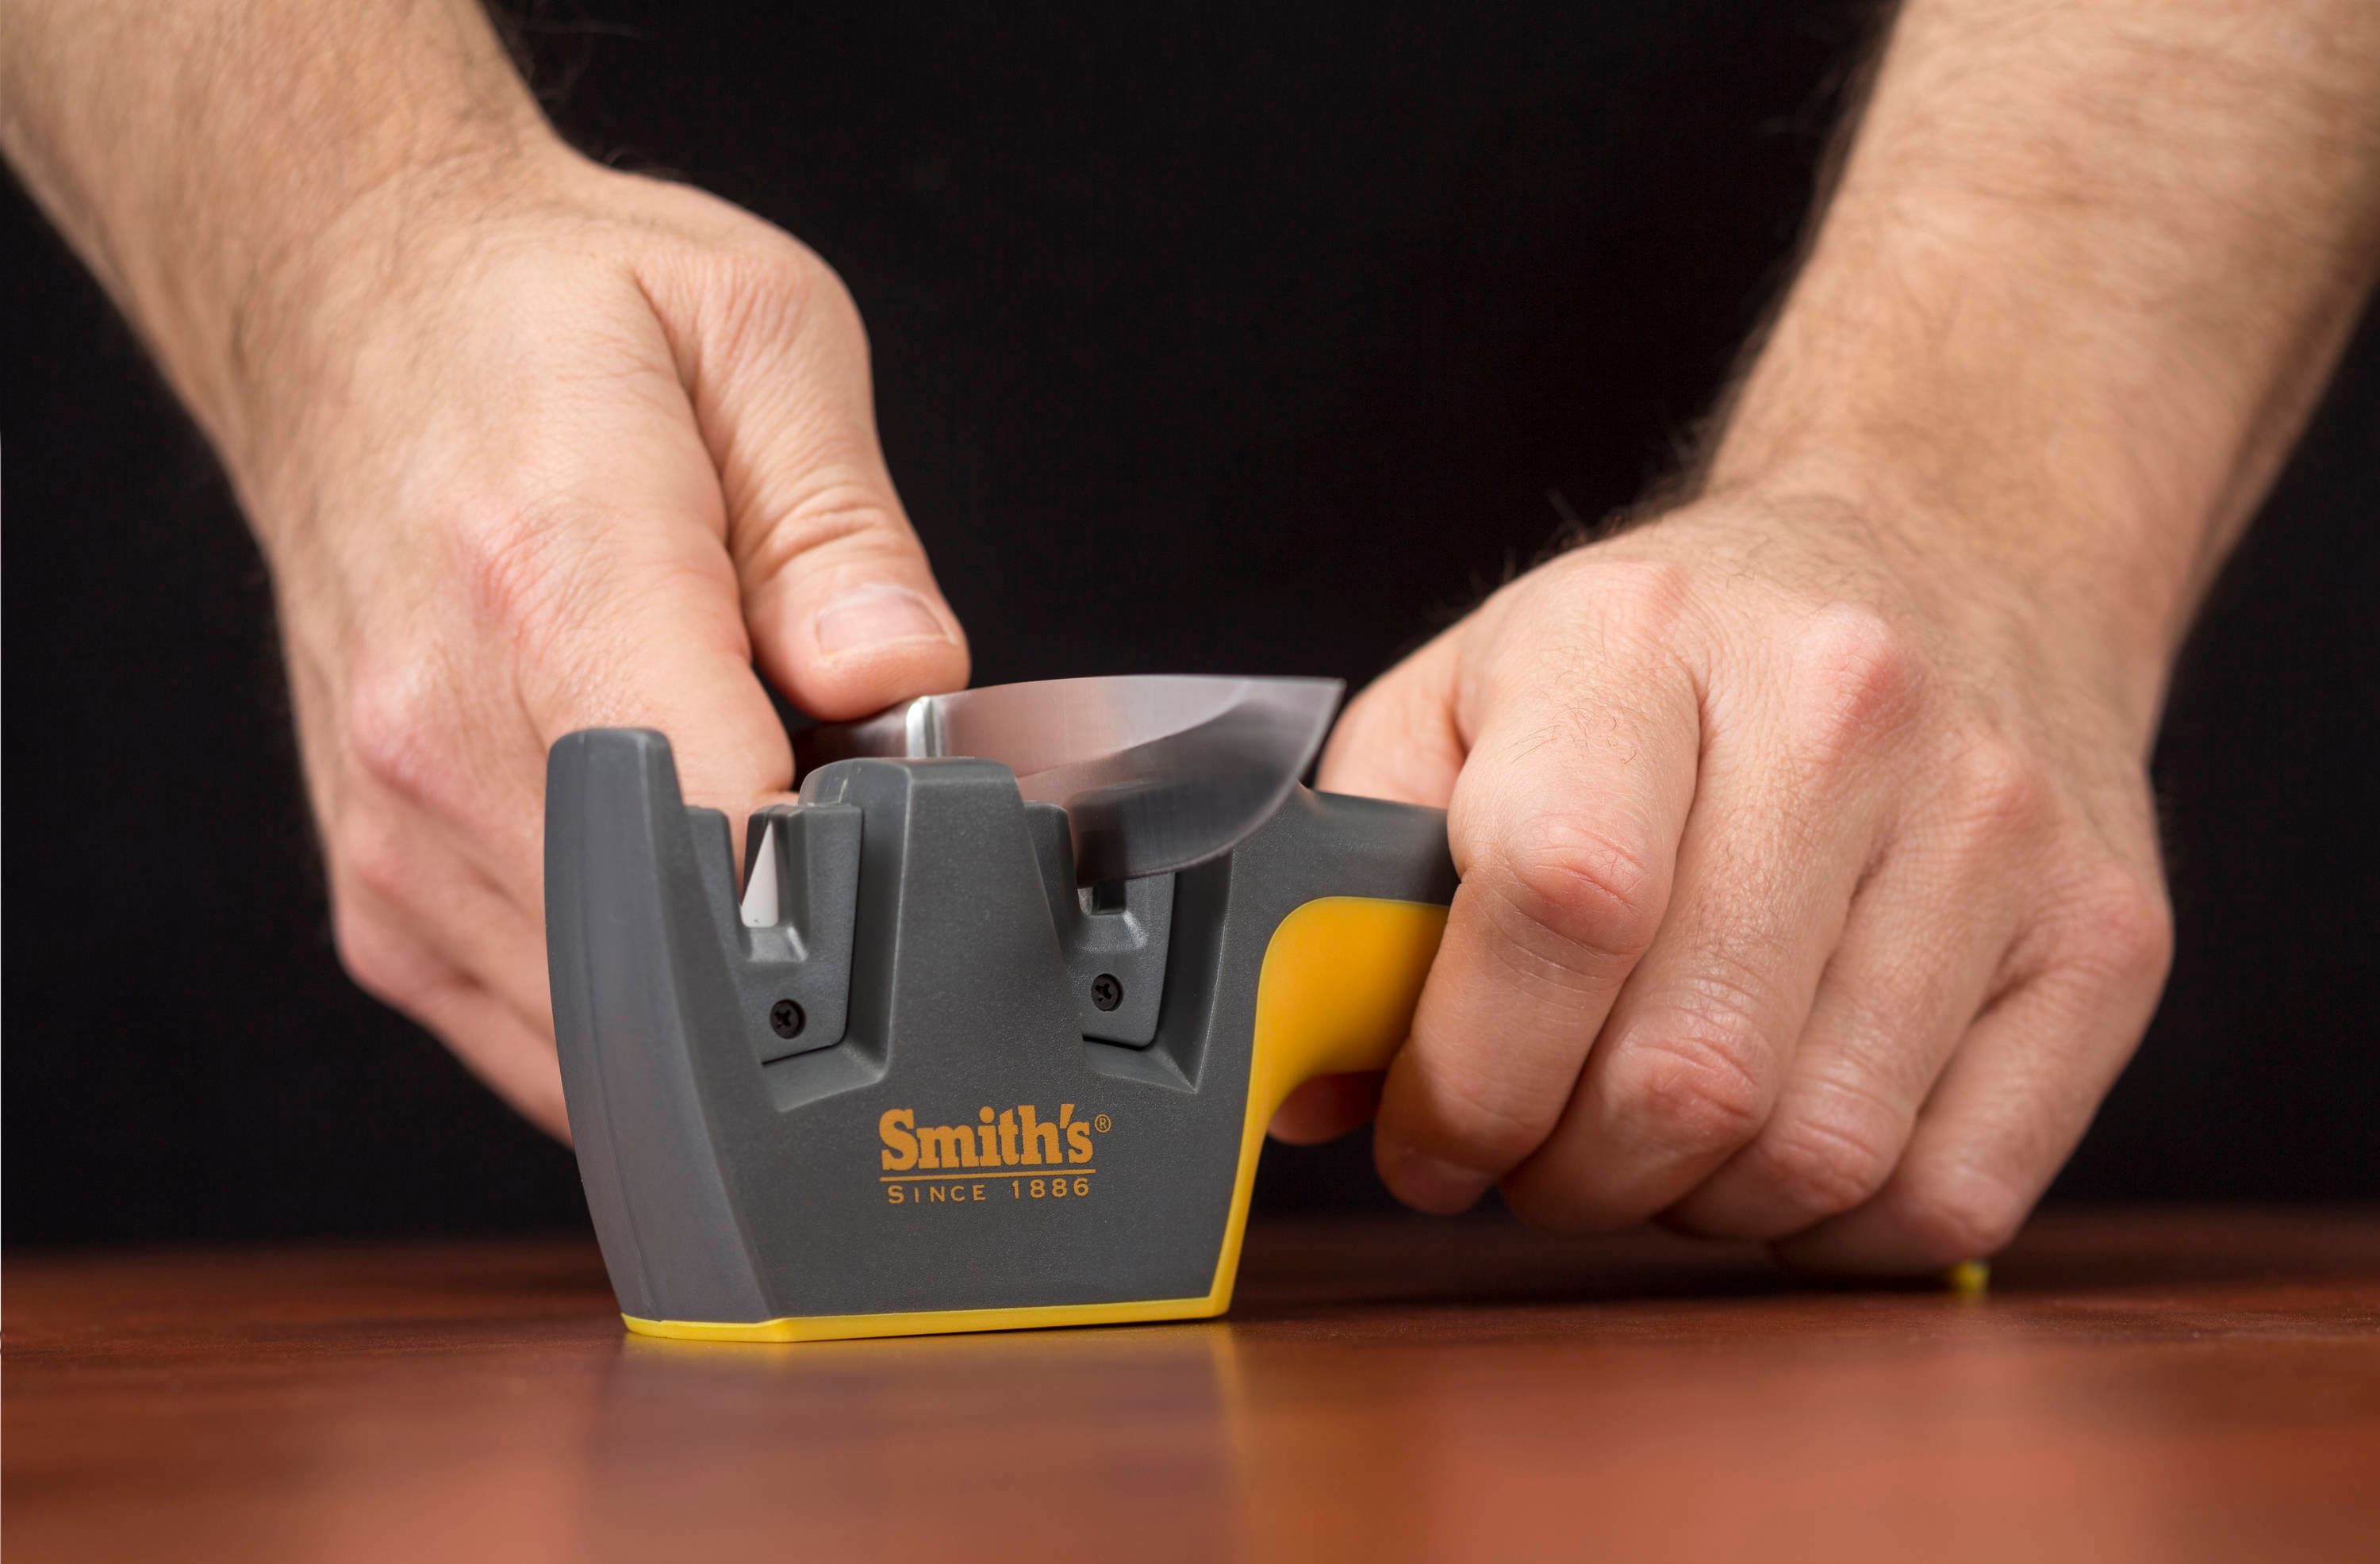 Smith's Consumer Products Store. EDGE PRO PULL-THRU KNIFE SHARPENER